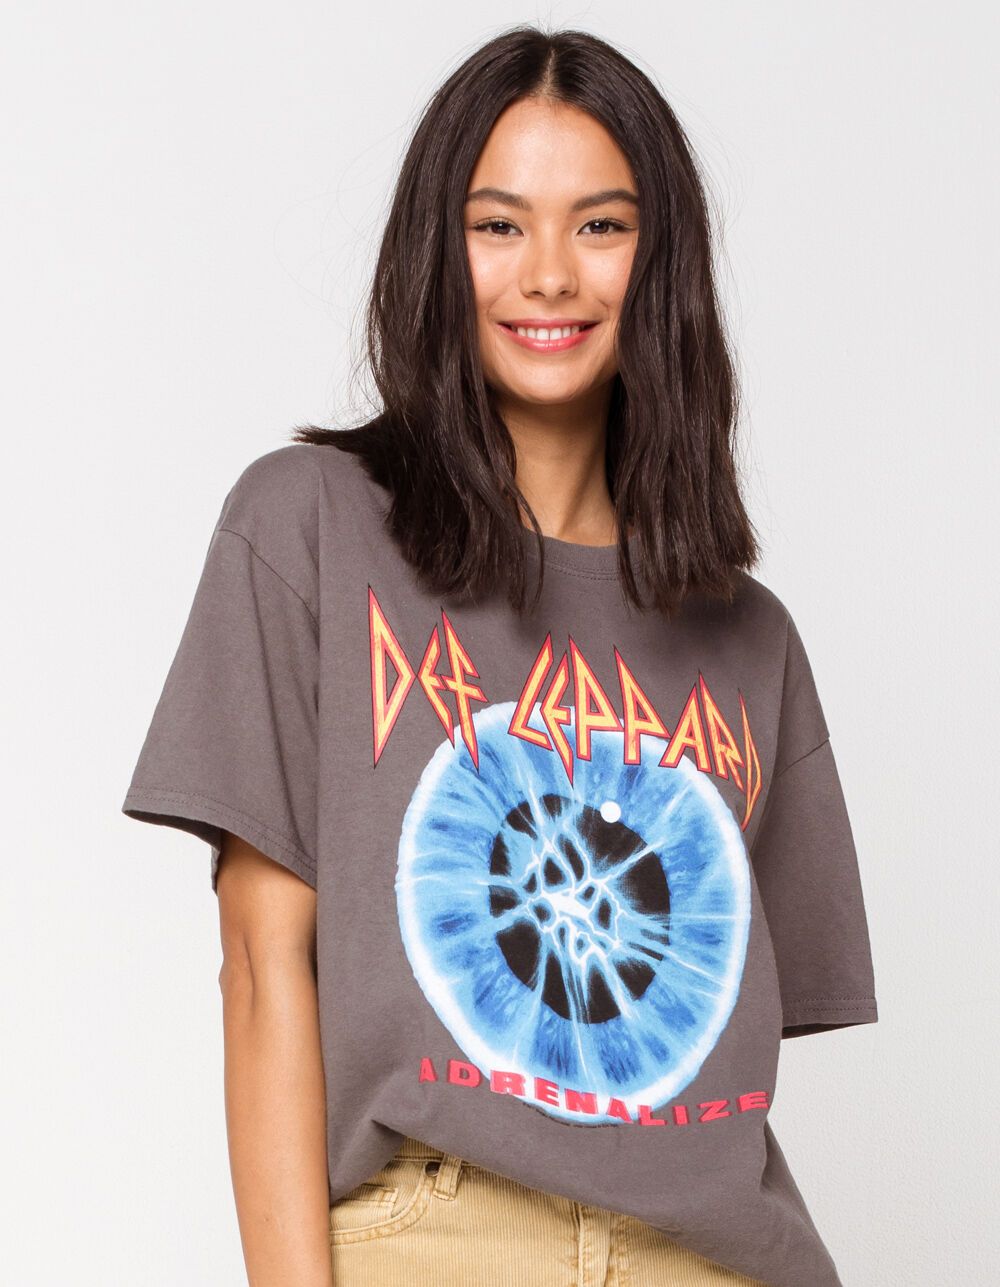 THE VINYL ICONS Def Leppard Adrenalize Tee | Tillys